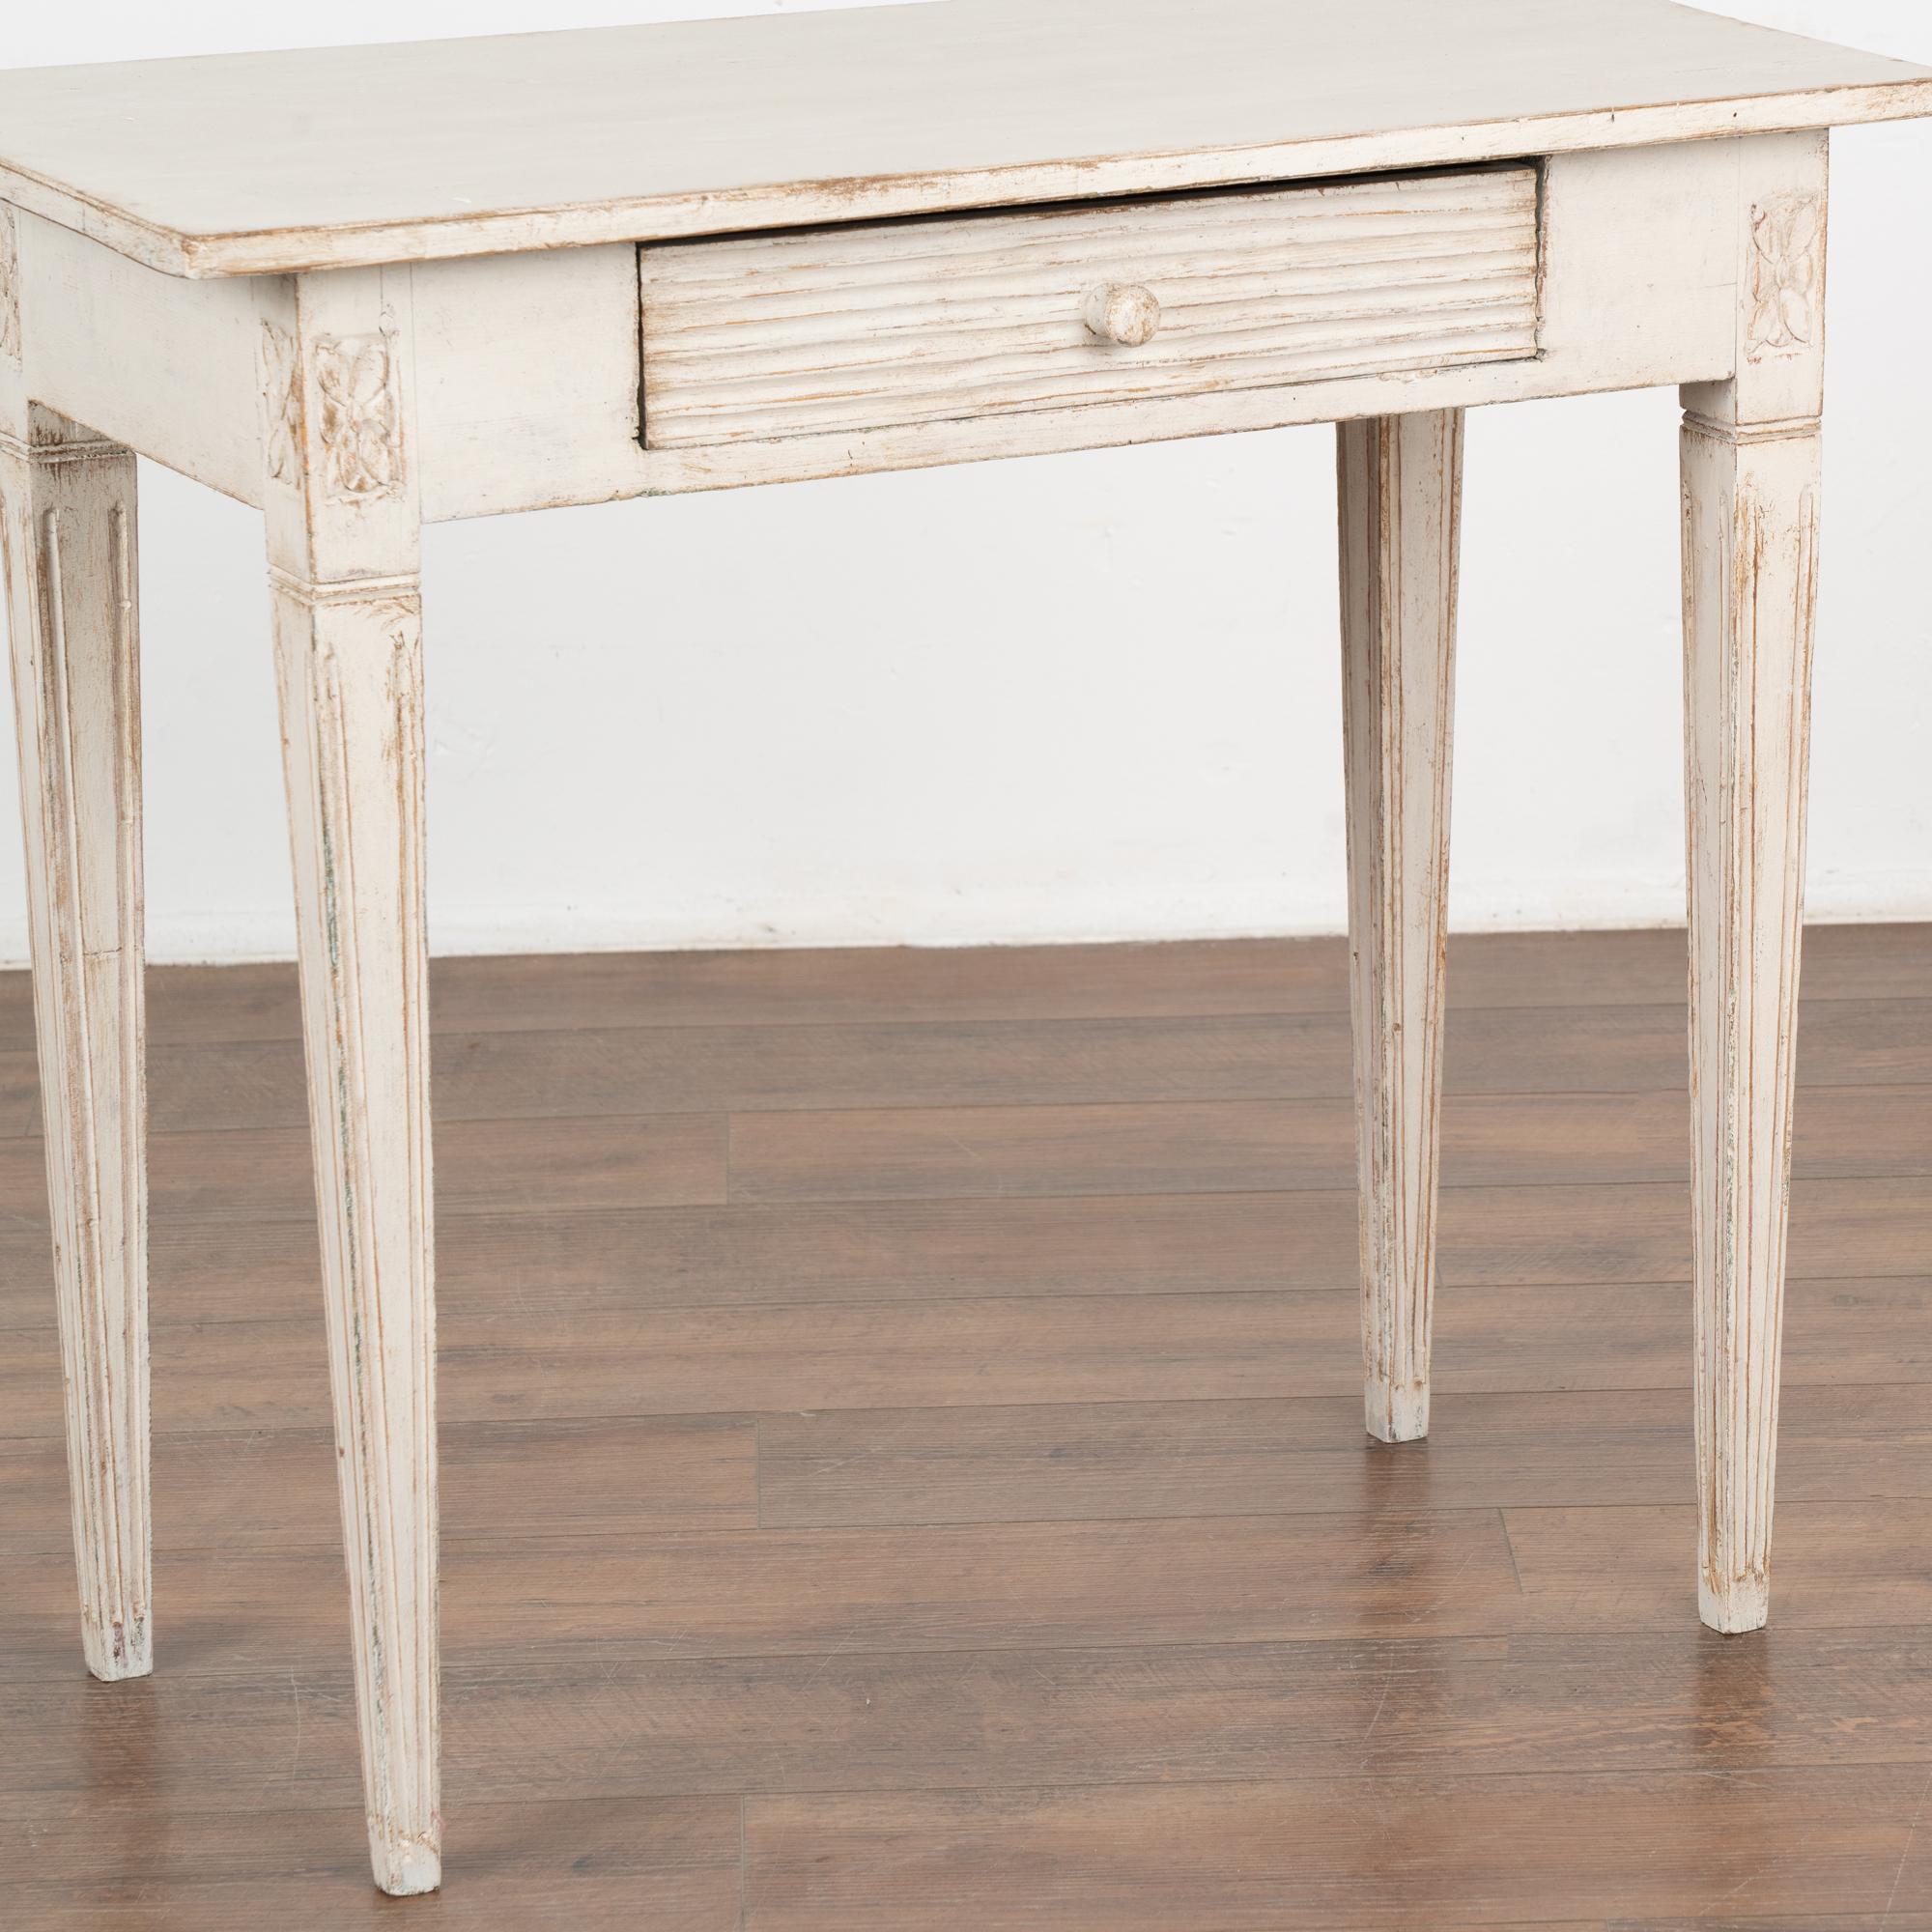 White Painted Side Table With Single Drawer, Sweden circa 1860-80 For Sale 2